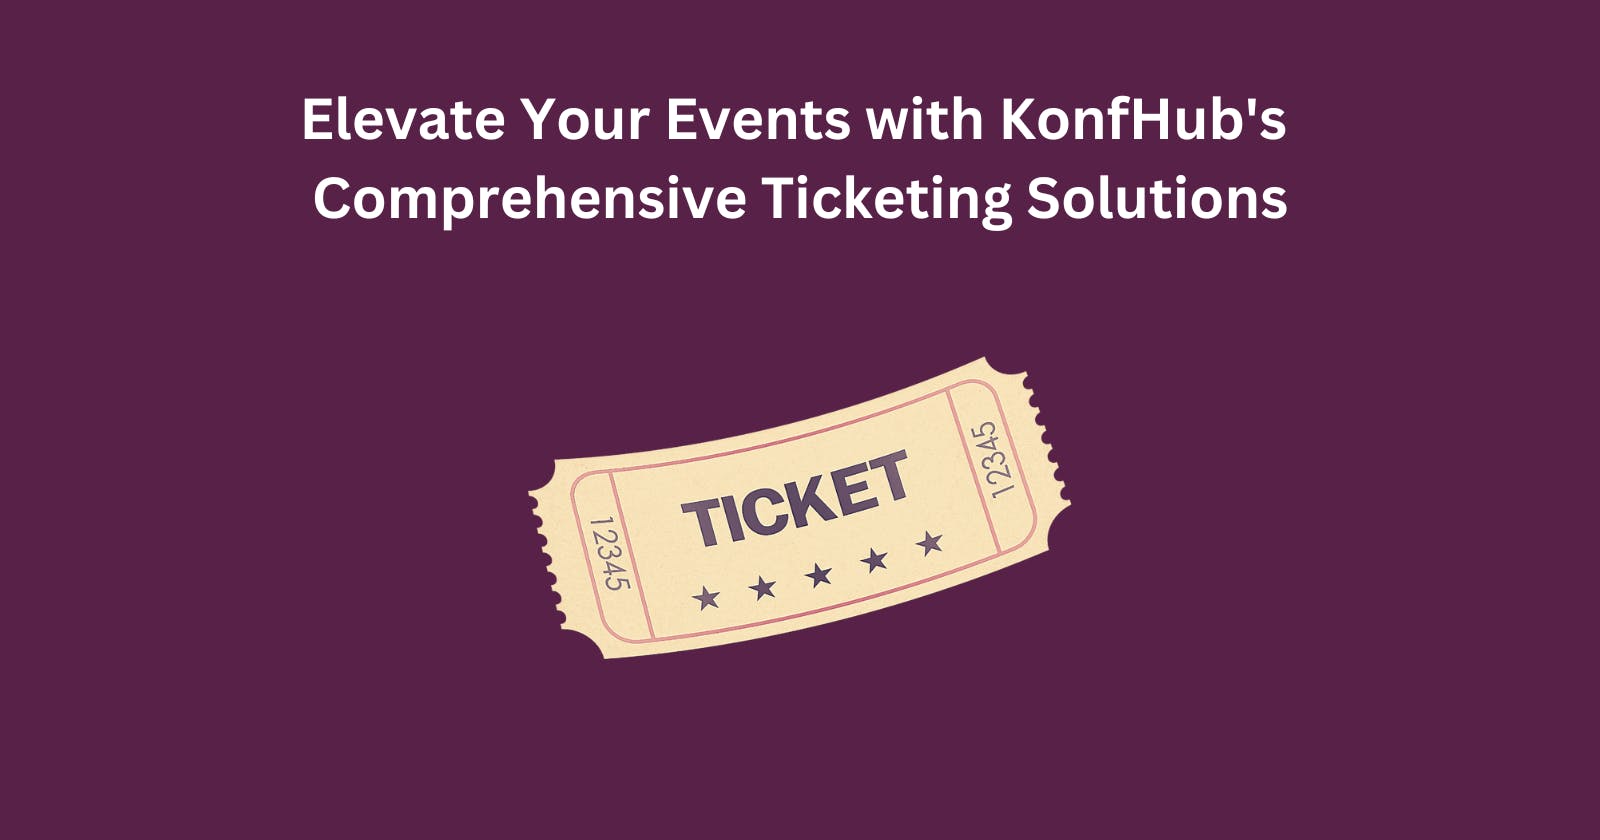 Elevate Your Events with KonfHub's Comprehensive Ticketing Solutions